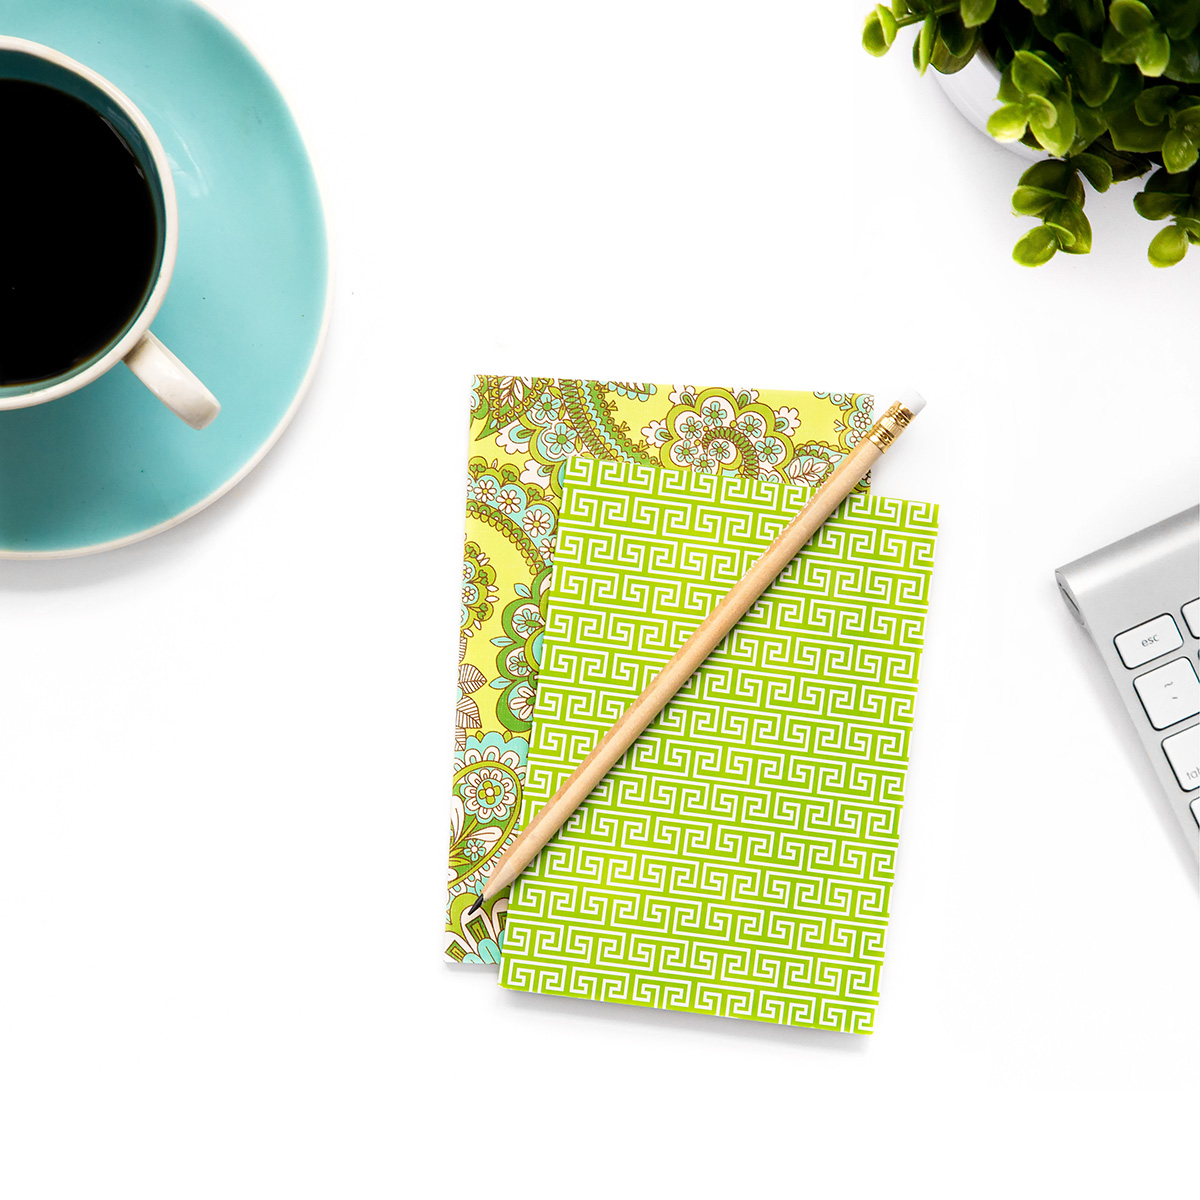 White Desktop with Blue Coffee Cup and Green Notebook